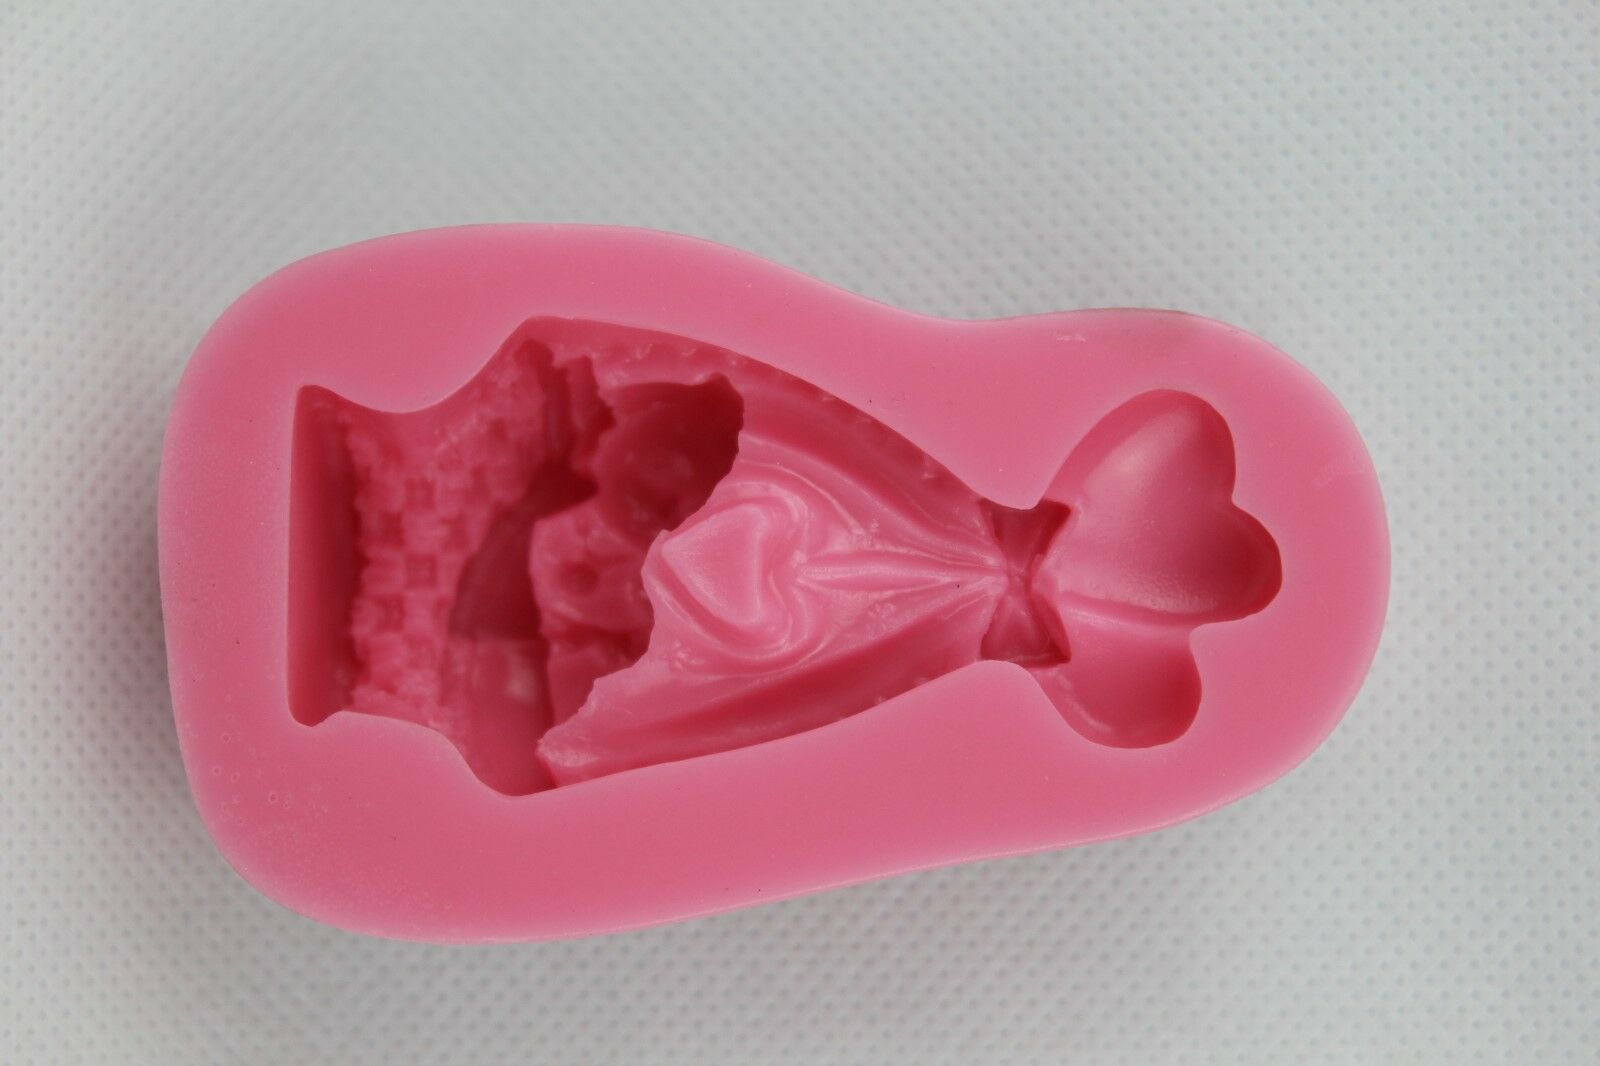 Baby in Basket Silicone Mould Baby Shower Christening Cake Sugar paste Fondant